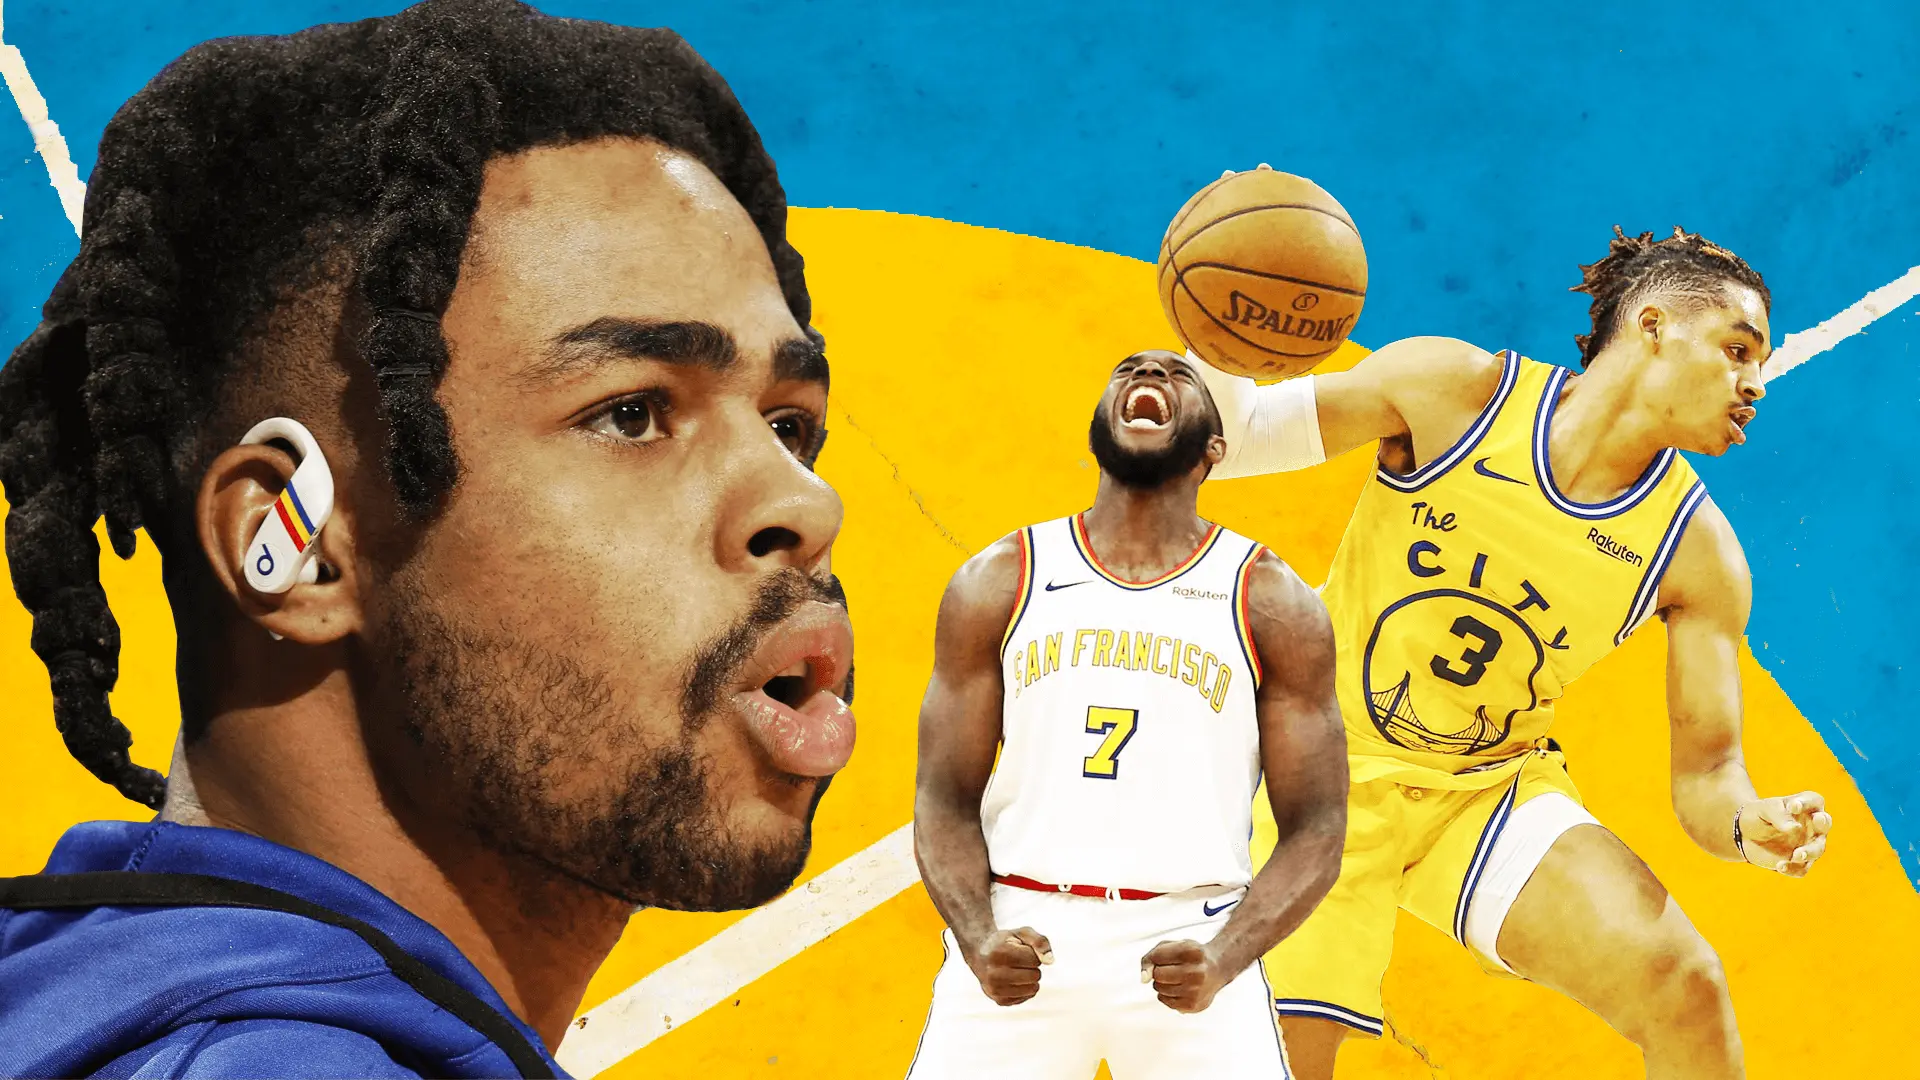 The 2019 Golden State Warriors are the underdogs of the NBA. Led by young up and coming players plus veteran Draymond Green...